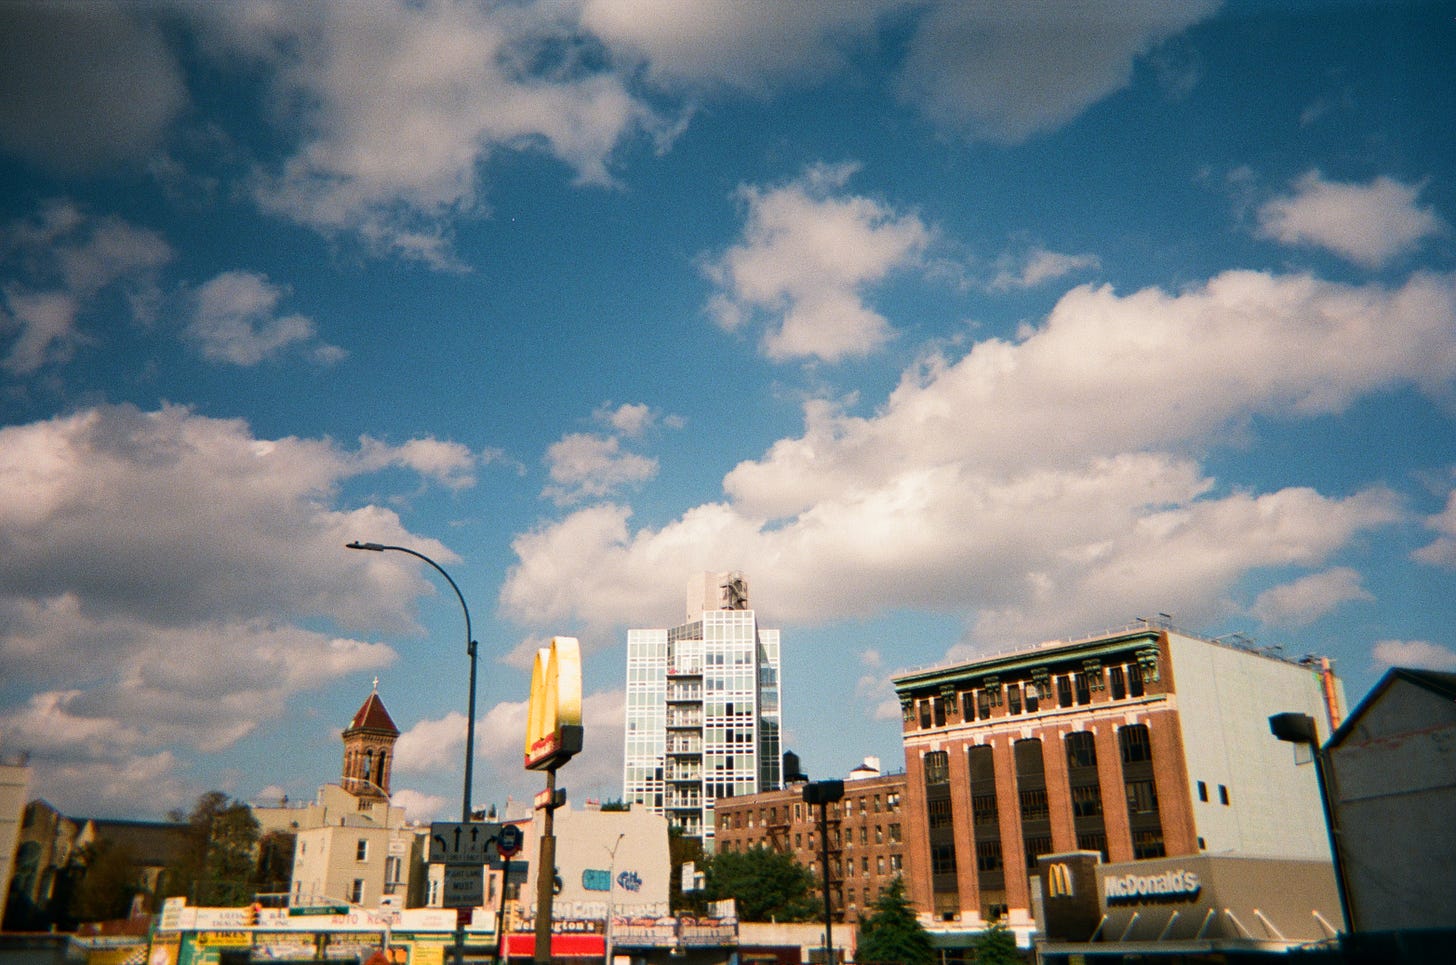 A skyline with a McDonald's, an old bank building, and a new tower crowned by a massive, open sky with fluffy clouds.